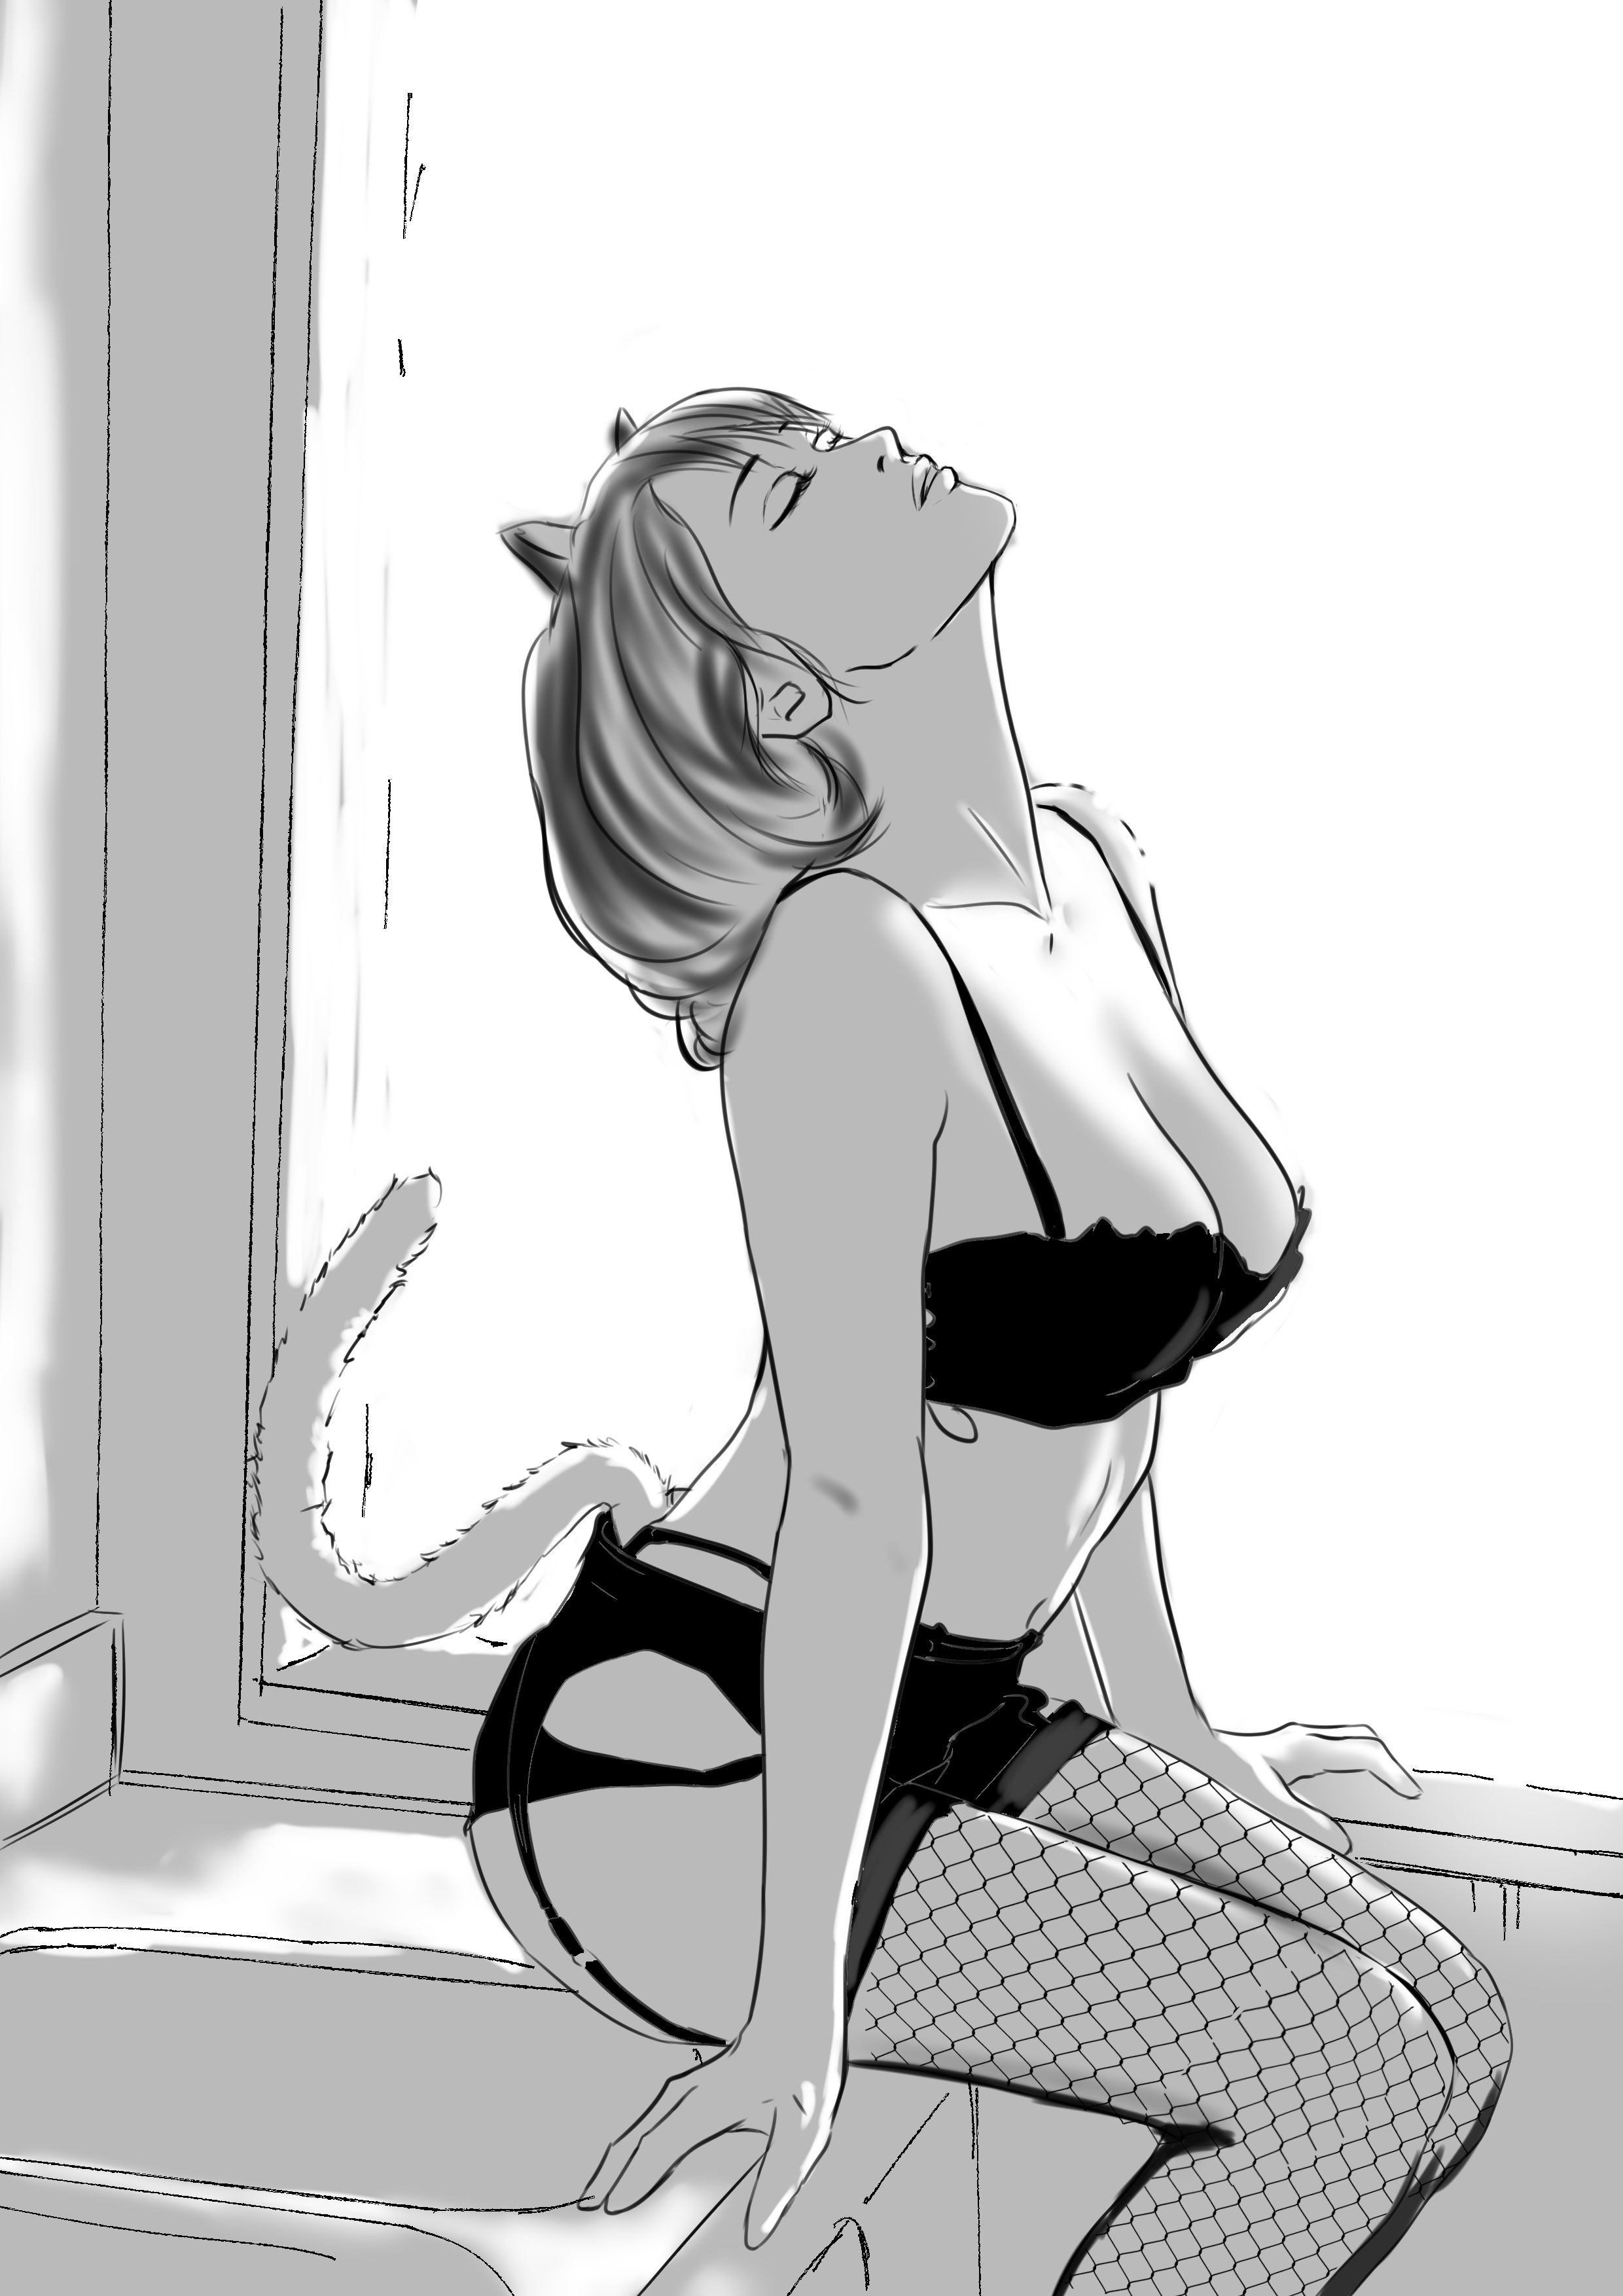 General 2480x3508 Âu Trung closed eyes cat ears portrait display cat girl digital painting cat tail sitting by the window pencil drawing drawing black lingerie artwork fishnet stockings fishnet digital art ArtStation indoors lingerie bra stockings